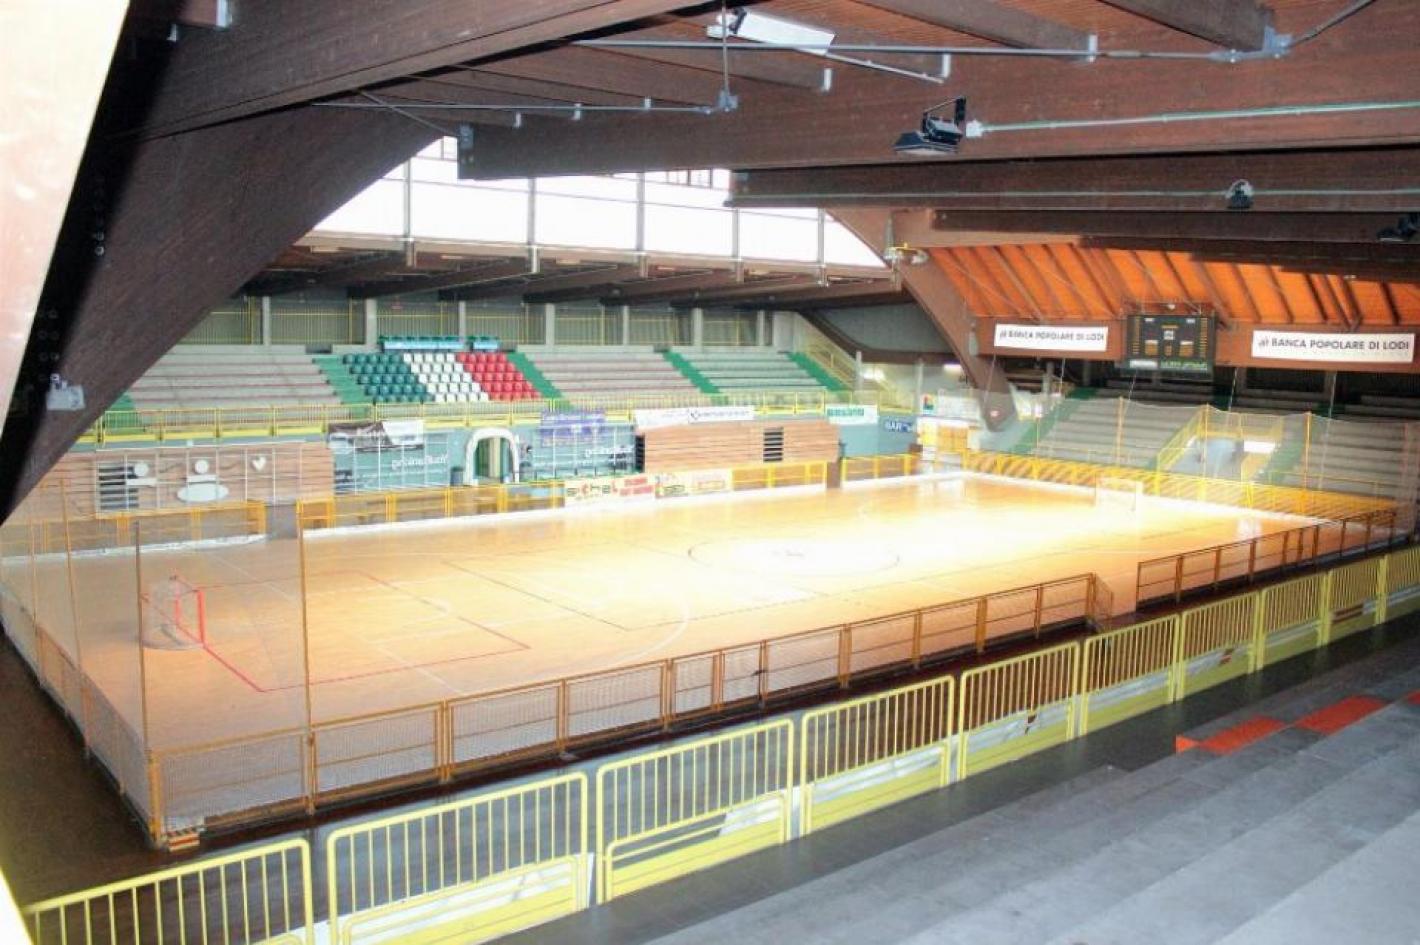 images/1-primo-piano/hockey_pista/place_1.jpg